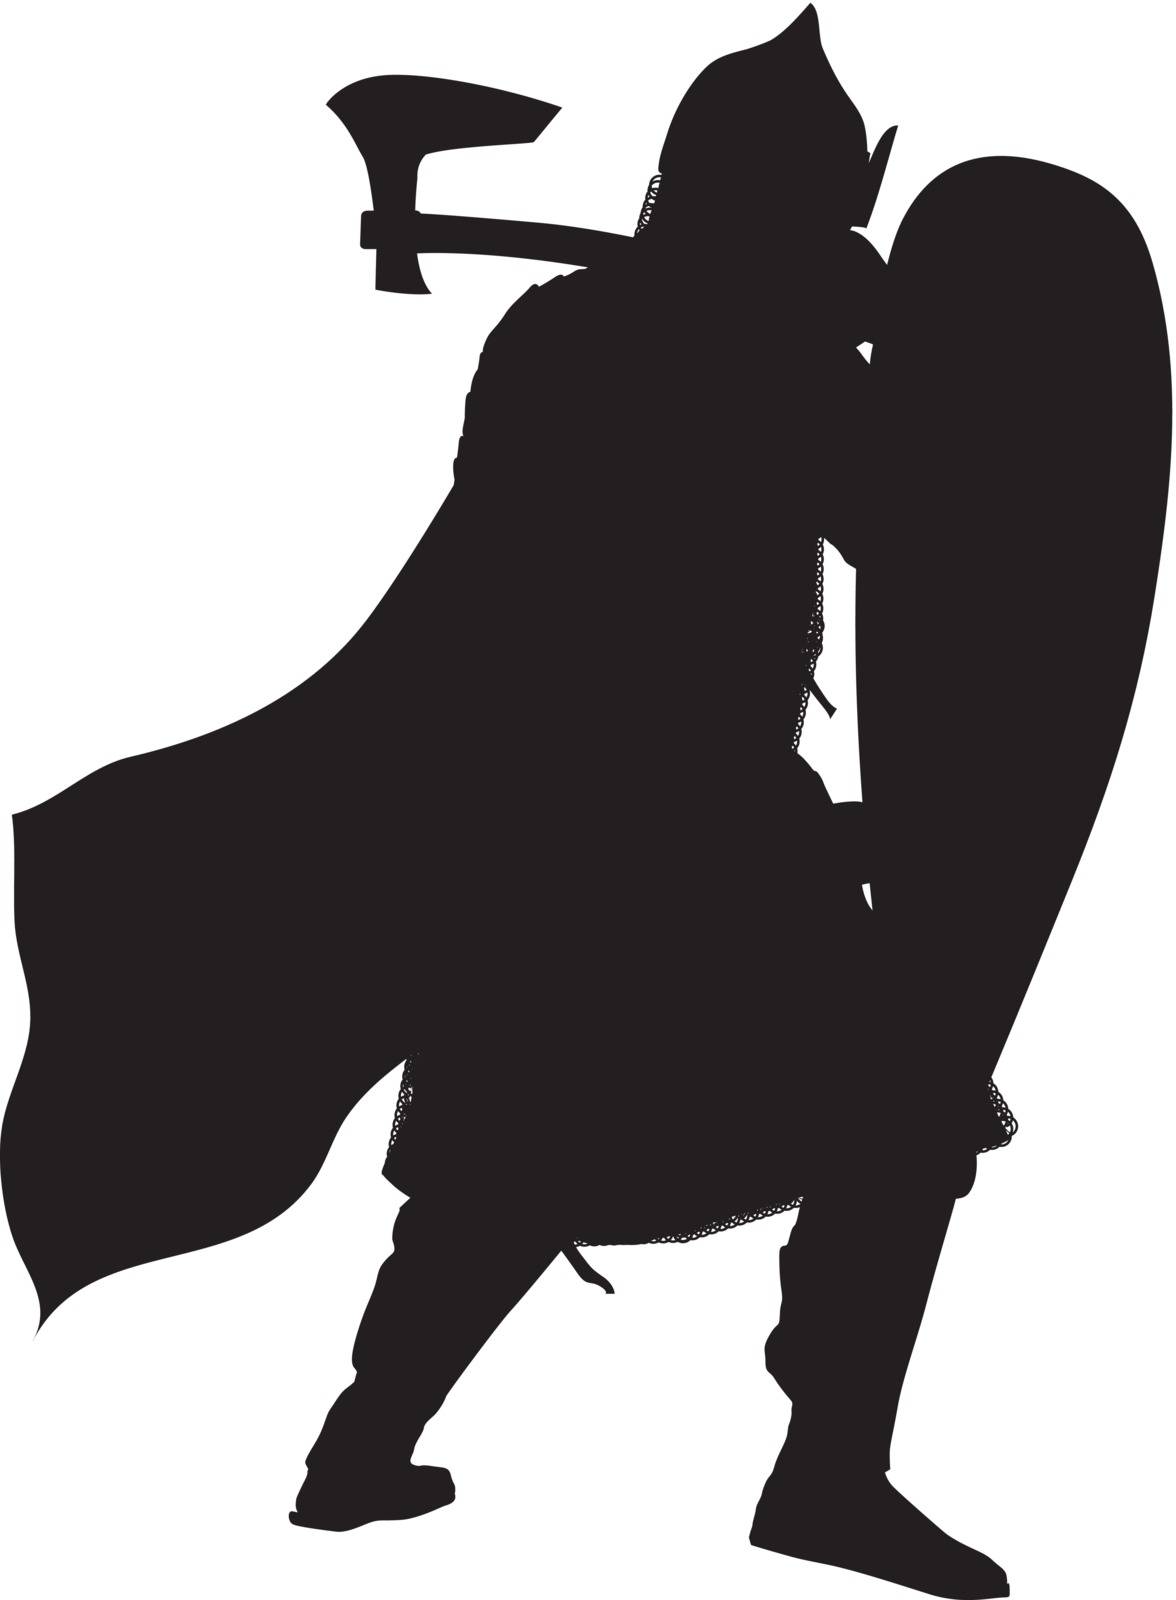 Slavic warrior with axe and shield detailed vector silhouette. EPS 8